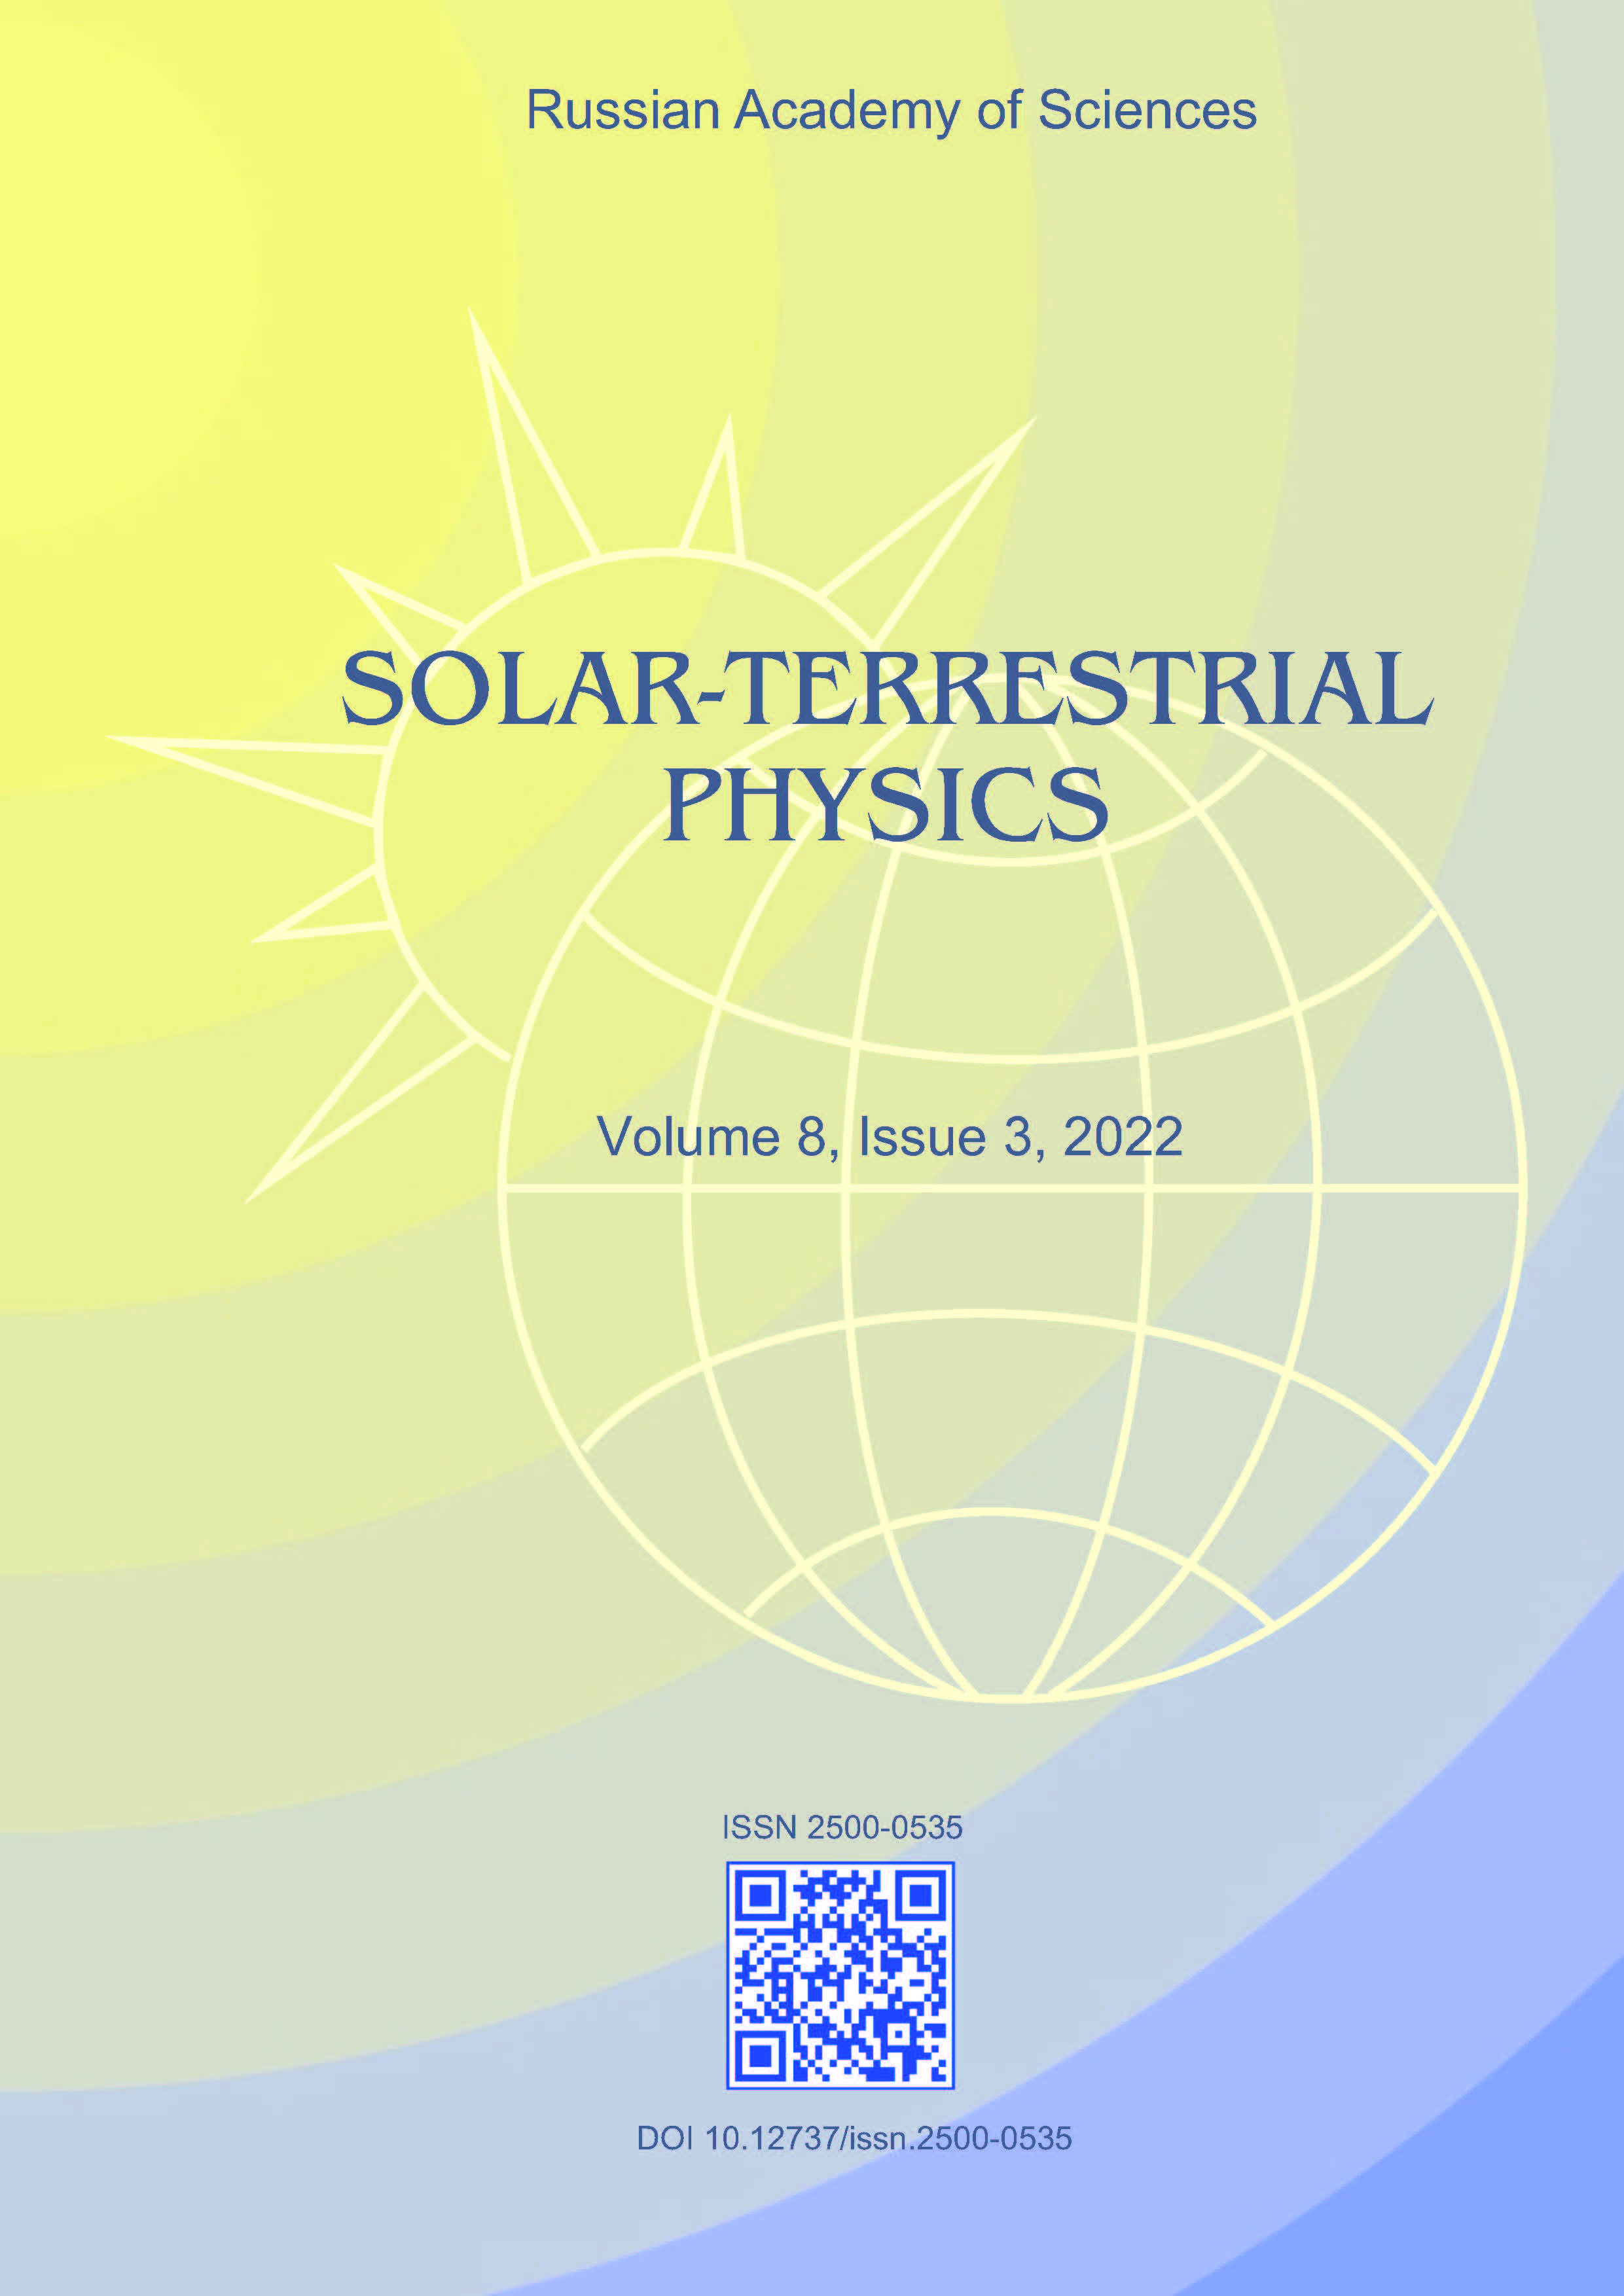                         Comparison between probability density functions of vertical electric current in solar active regions based on HMI/SDO and SOT/Hinode data
            